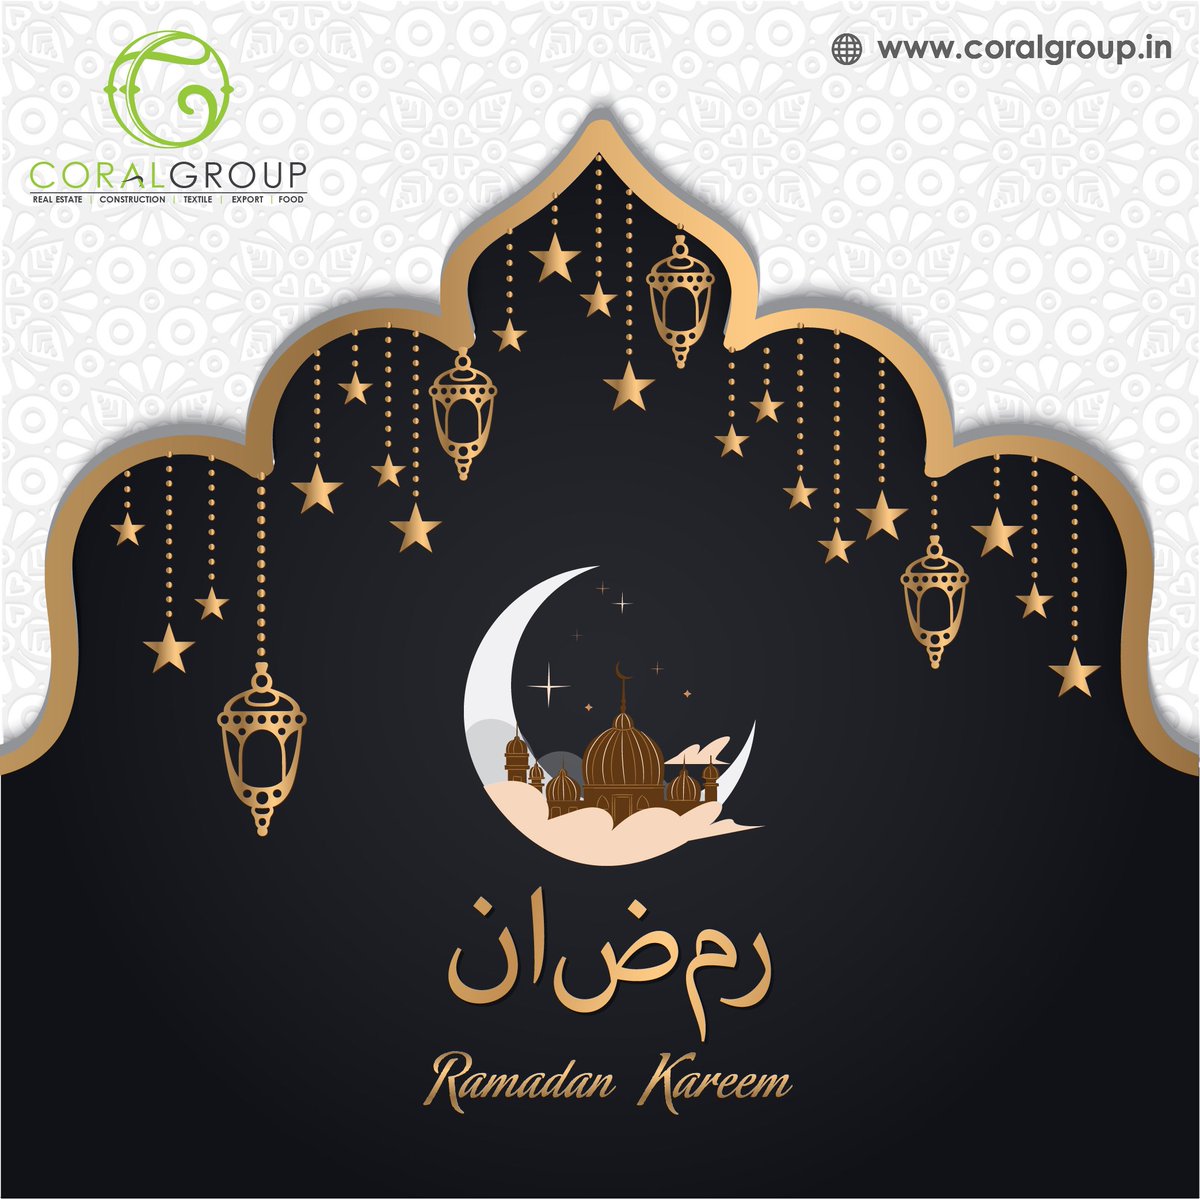 May the spirit of Ramadan provide you the endurance to undertake all fasts and strengths to say all prayers.

To know more Call : +91 542 2397777 or visit : 
coralgroup.in

#Textile #CoralGroup #CoralGreensBuildtech #TexIndia 
#CoralFashion #CoralExport #ramadan